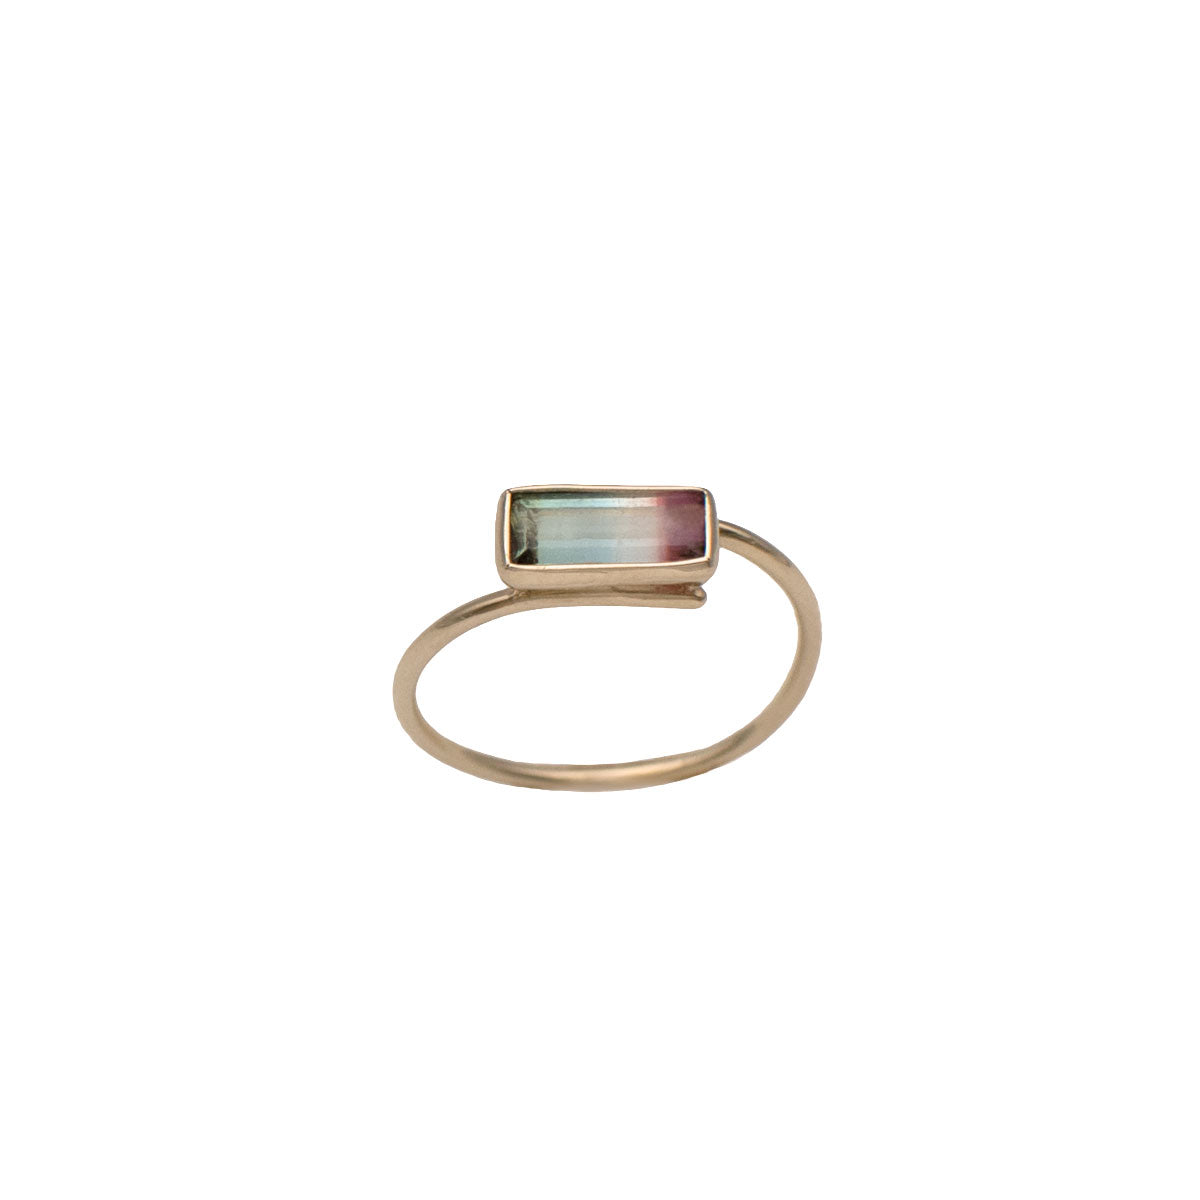 watermelon tourmaline ring embrace in 14k solid yellow gold